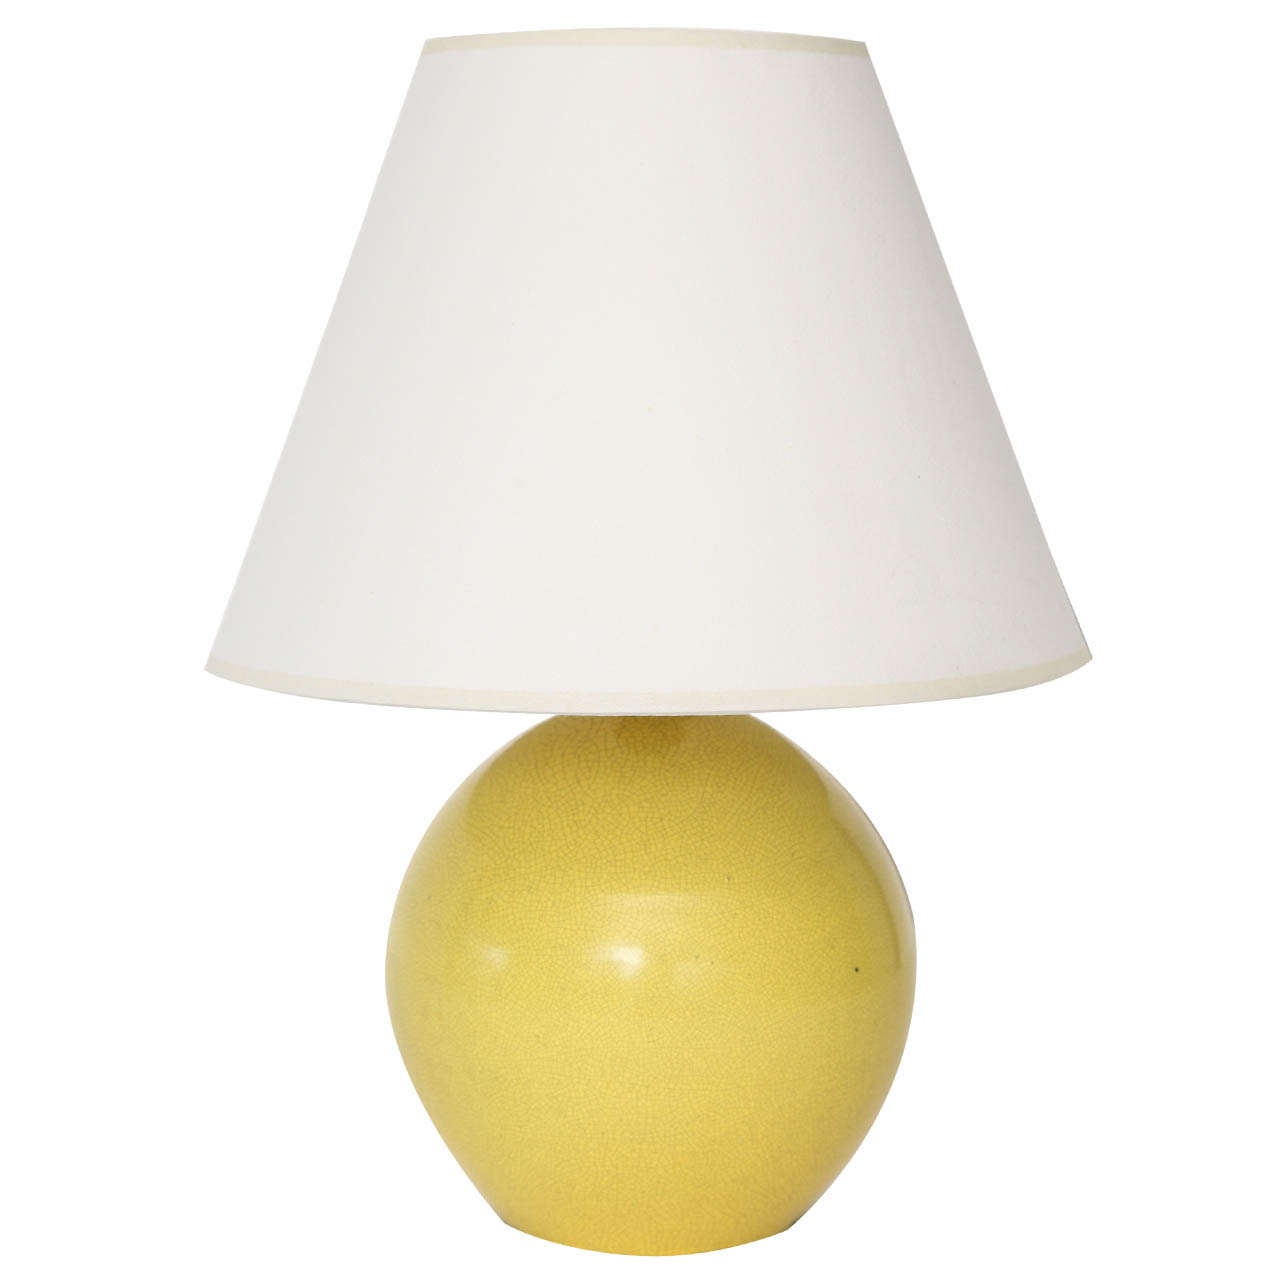 Small Table Lamp with Crackled Yellow Glaze For Sale